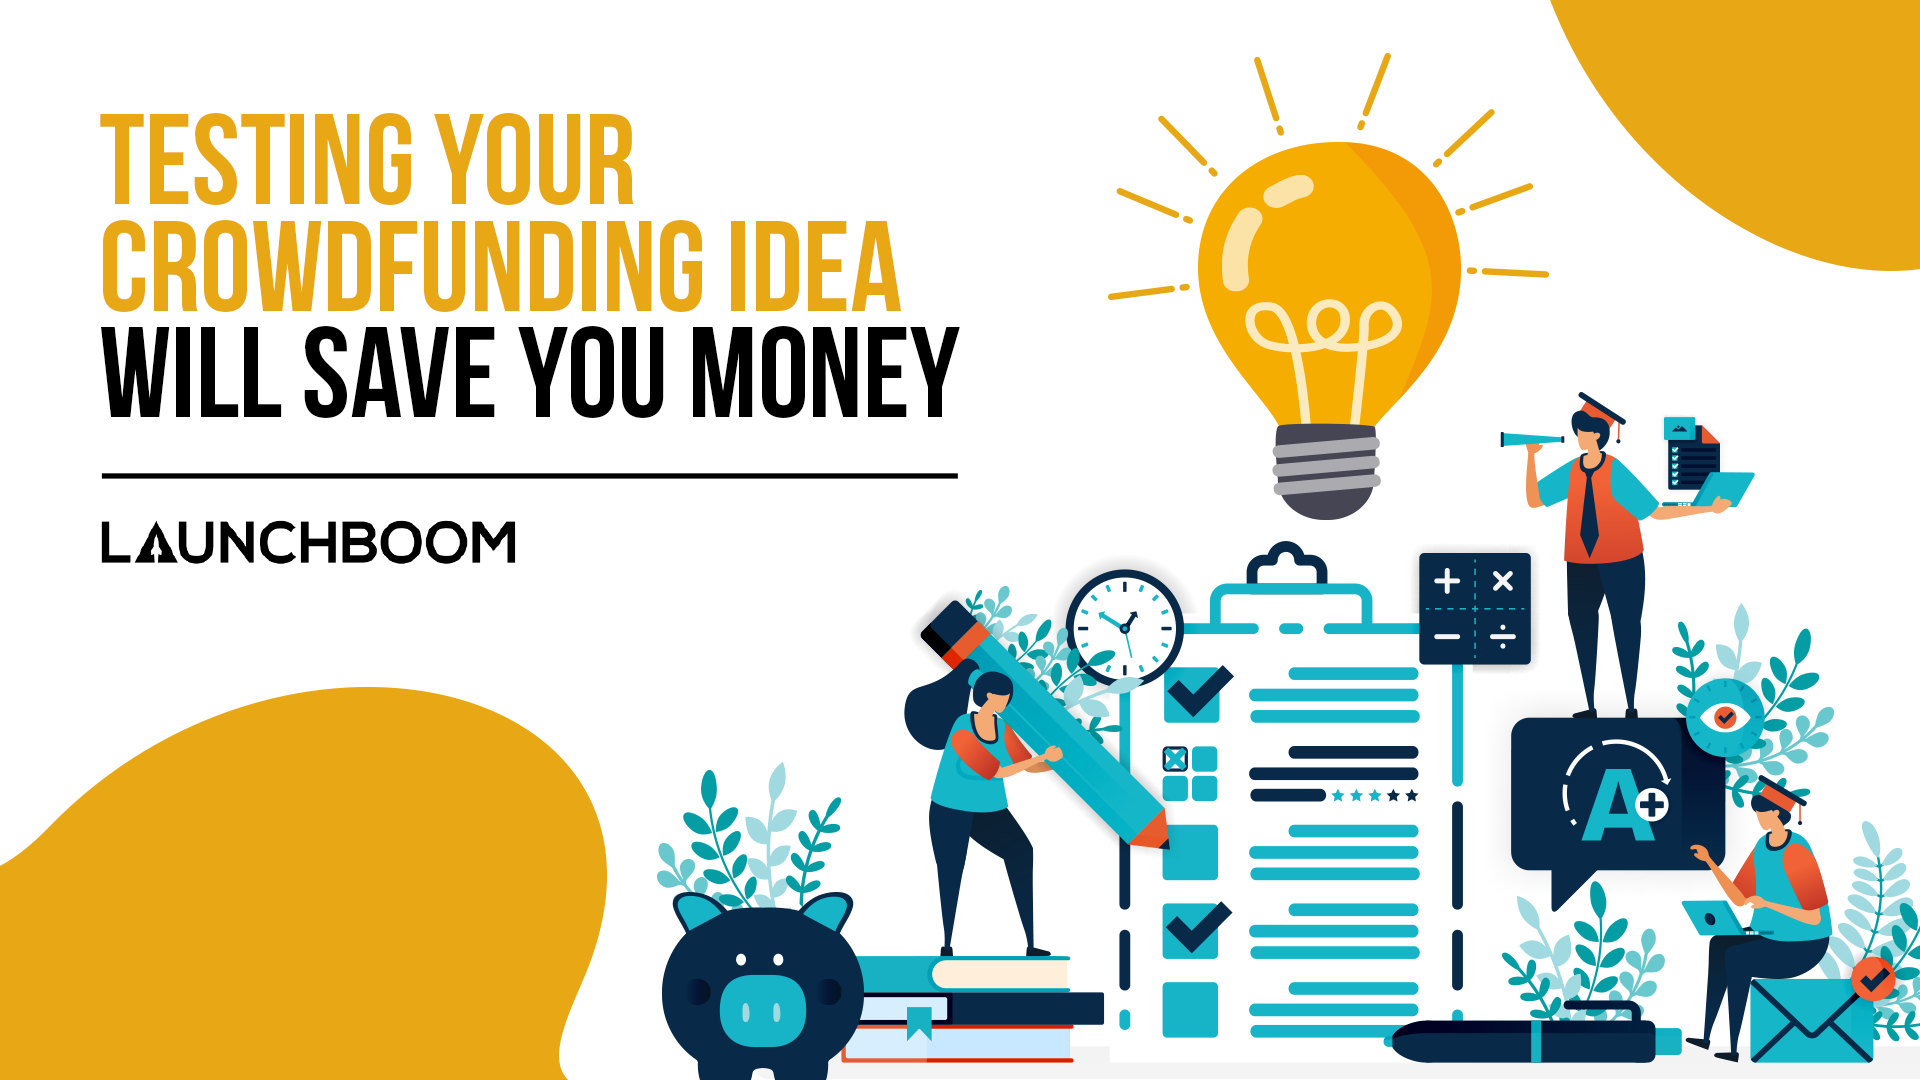 Testing your crowdfunding idea will save you money